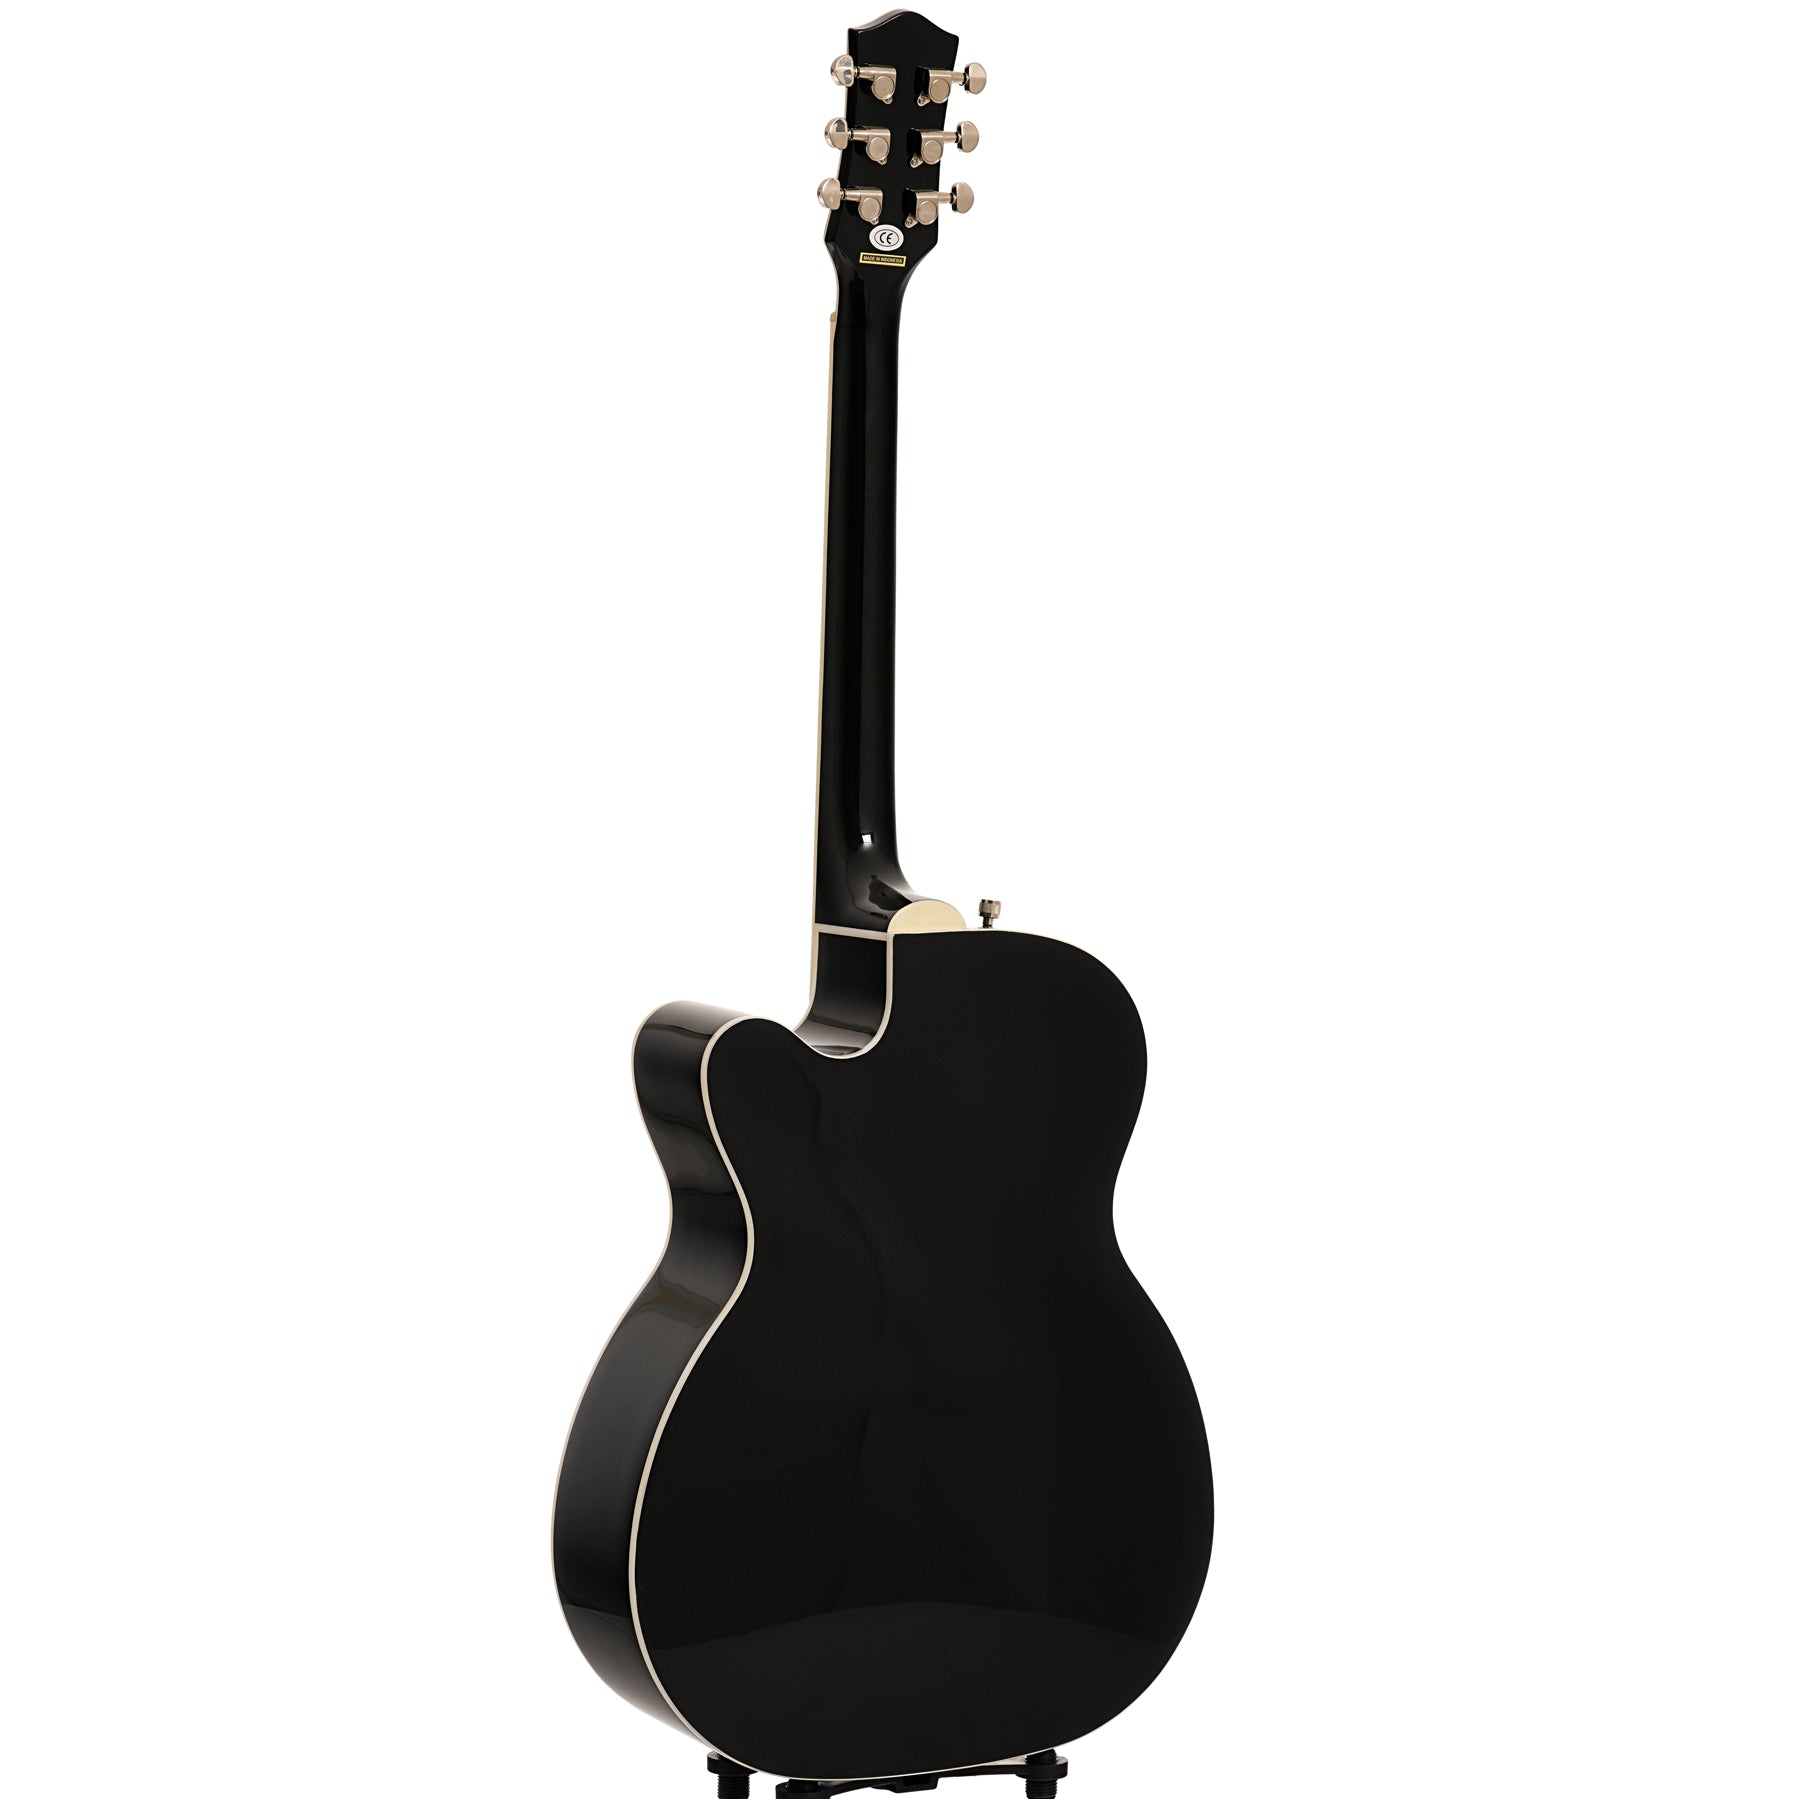 Full back and side of Gretsch G-5013CE Rancher Jr. Acoustic Electric